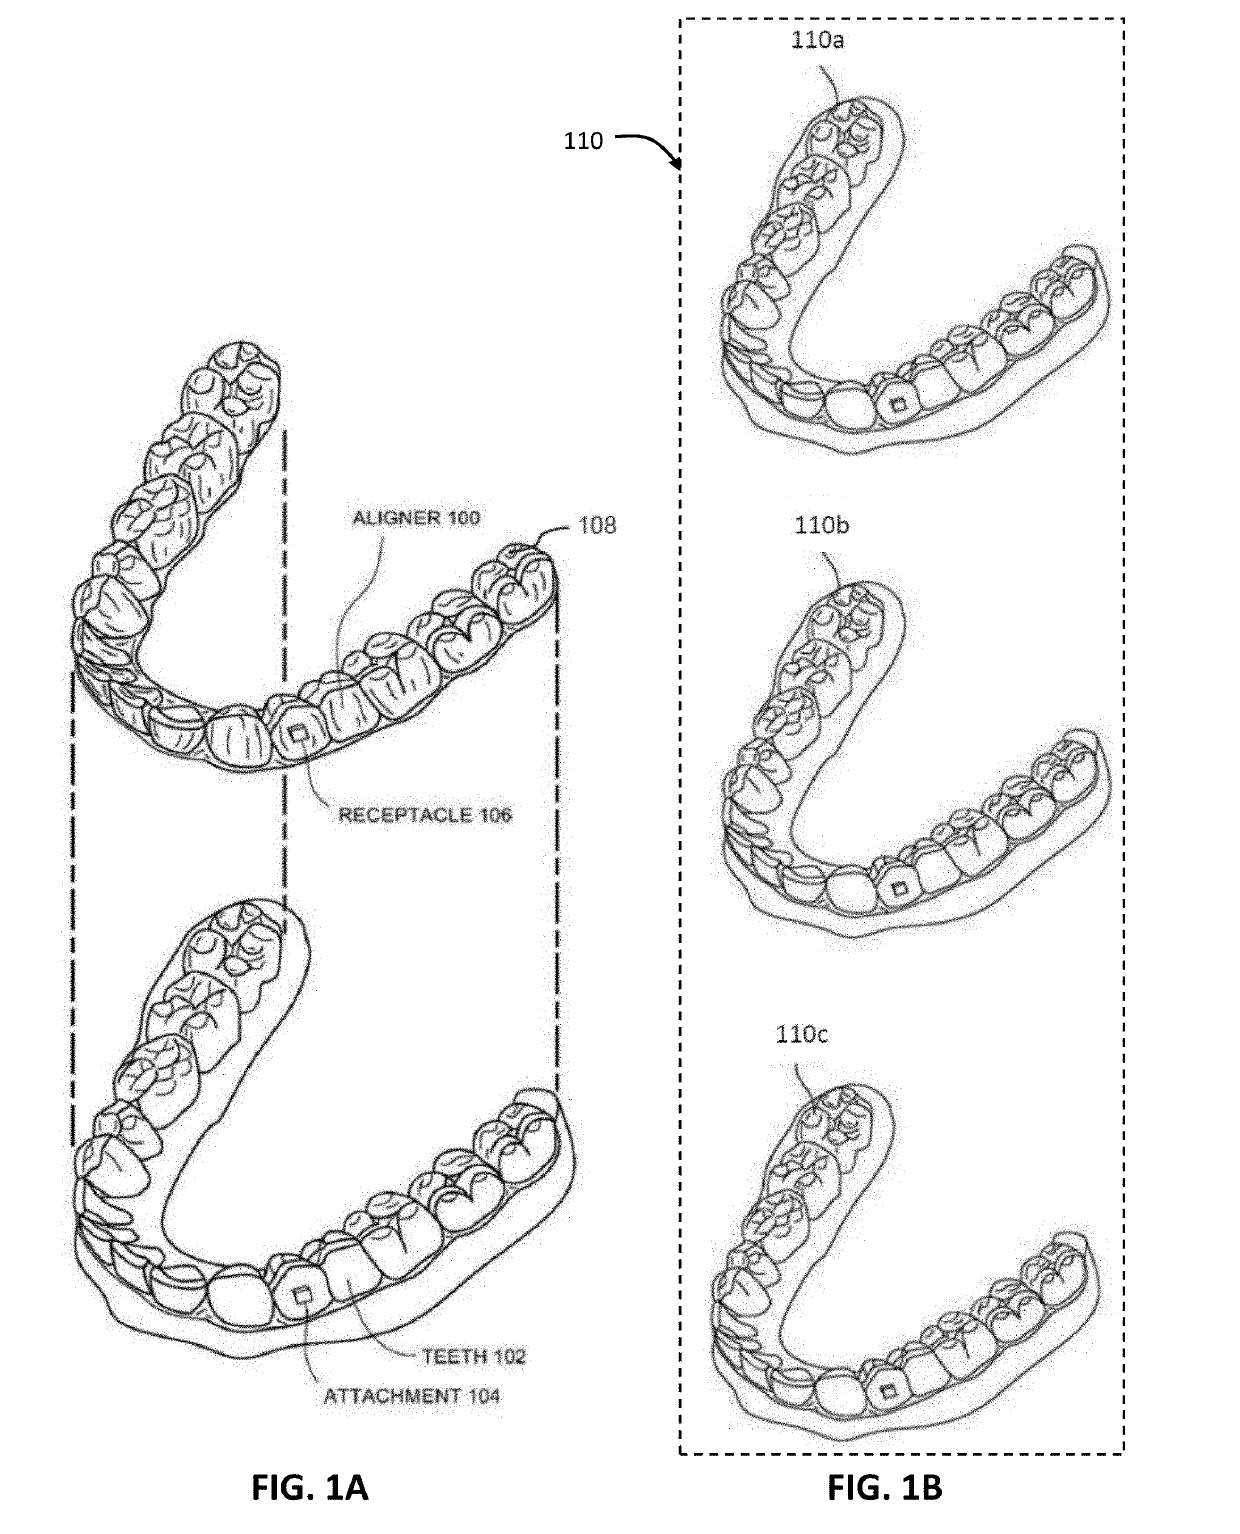 Dental appliance having selective occlusal loading and controlled intercuspation